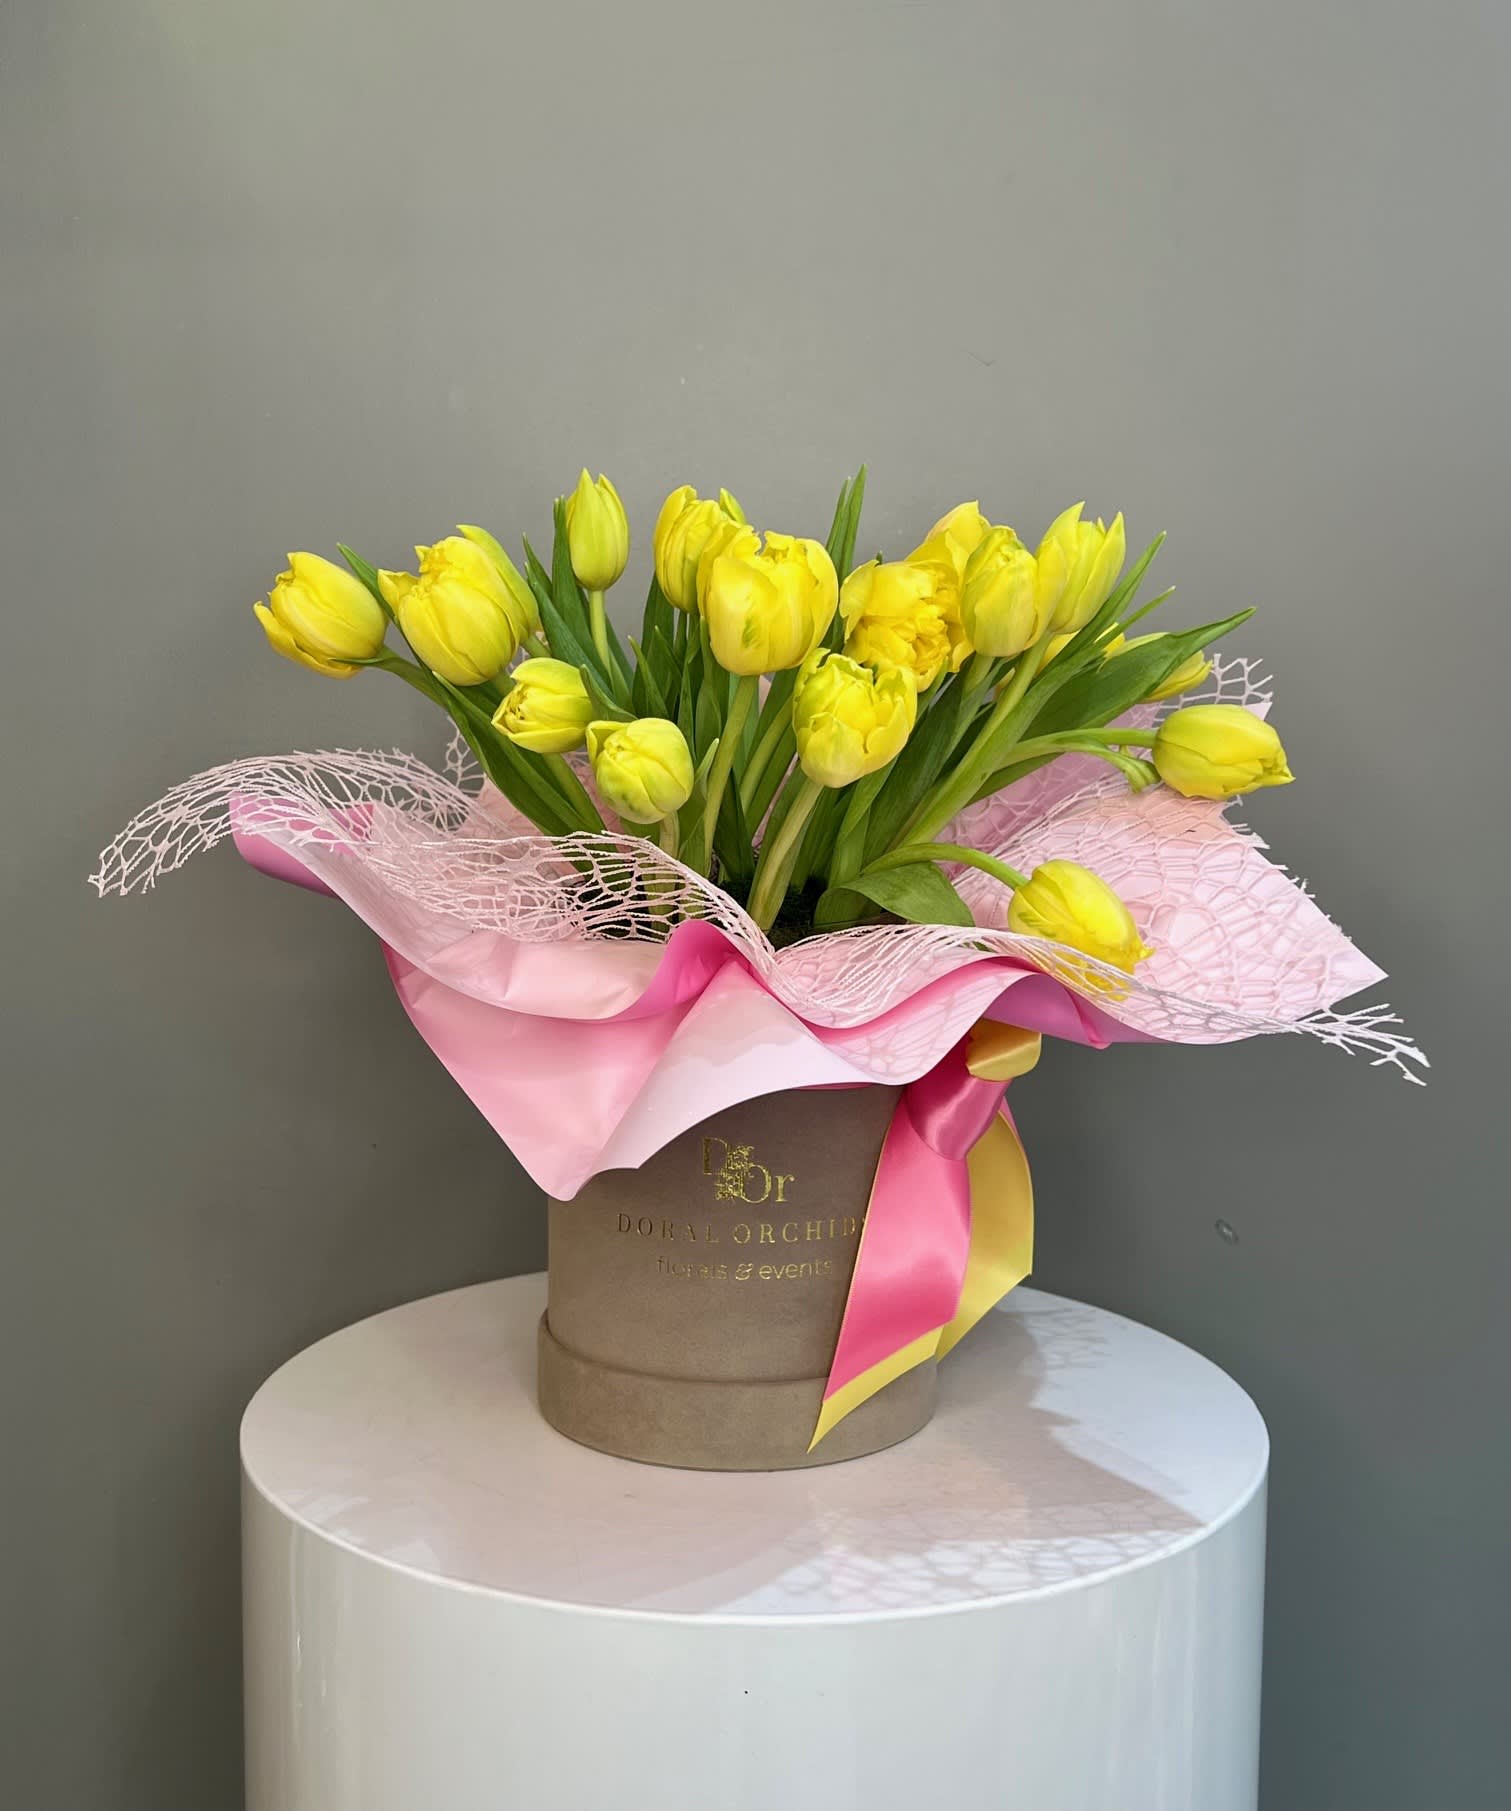 Tulips in a box - yellow - Arrangement of 2 bright yellow Tulips in a trendy velvet box